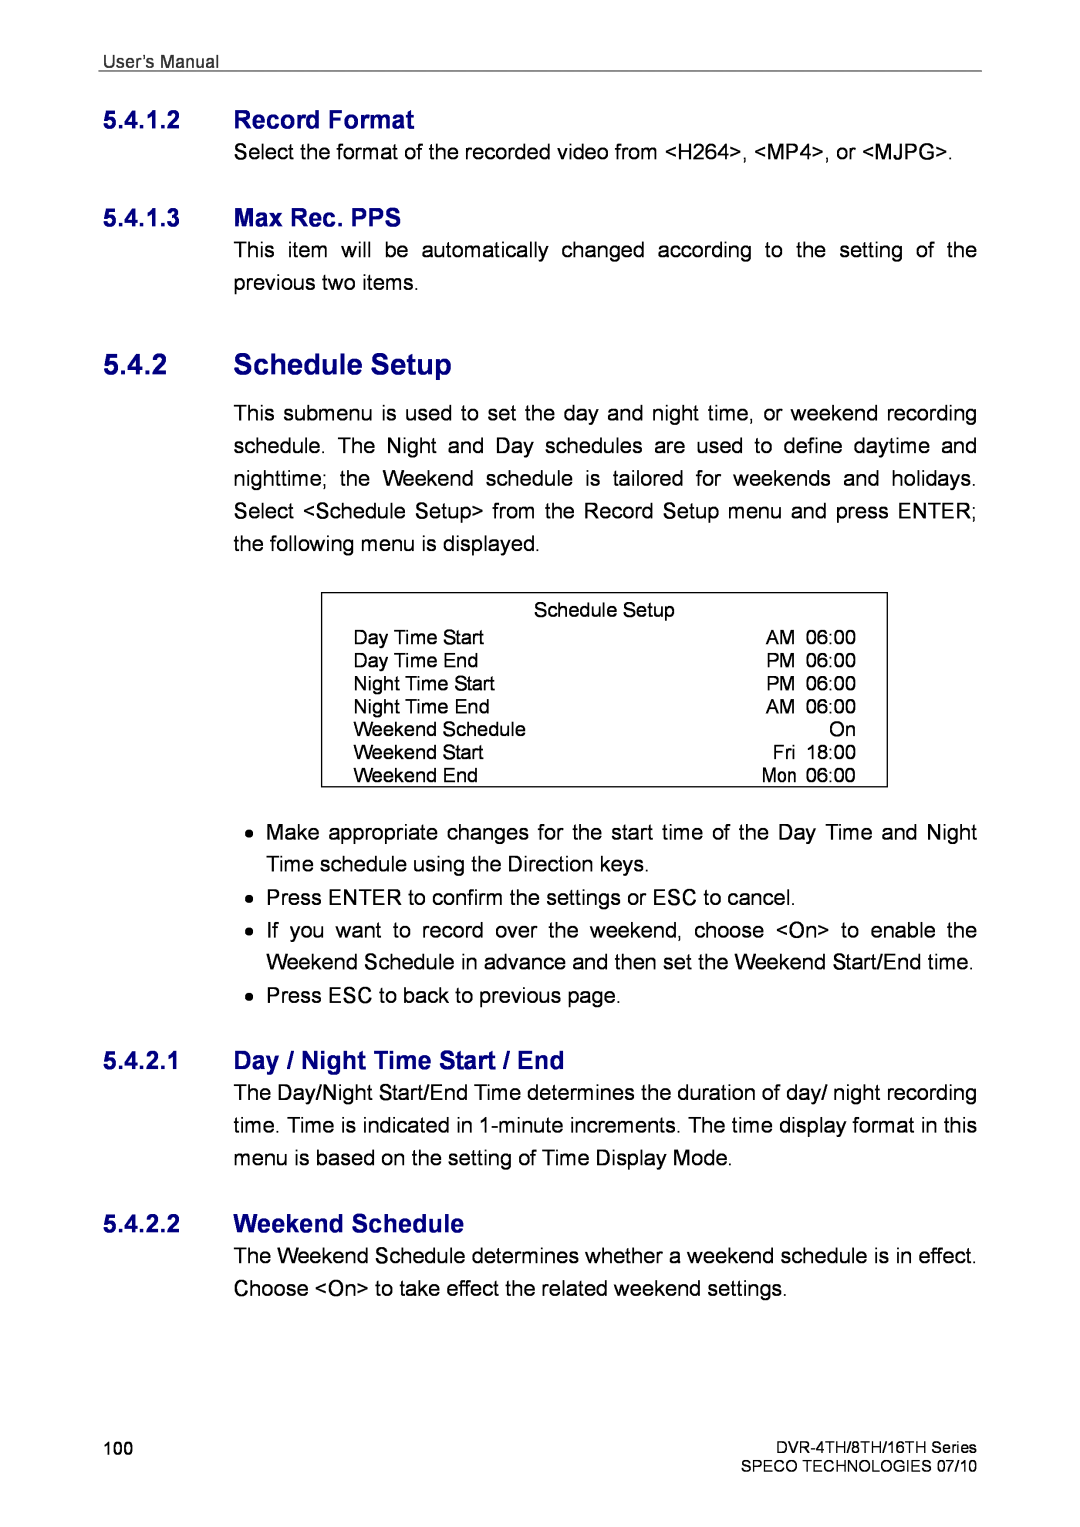 Speco Technologies 16TH, 8TH Schedule Setup, Record Format, Max Rec. PPS, Day / Night Time Start / End, Weekend Schedule 